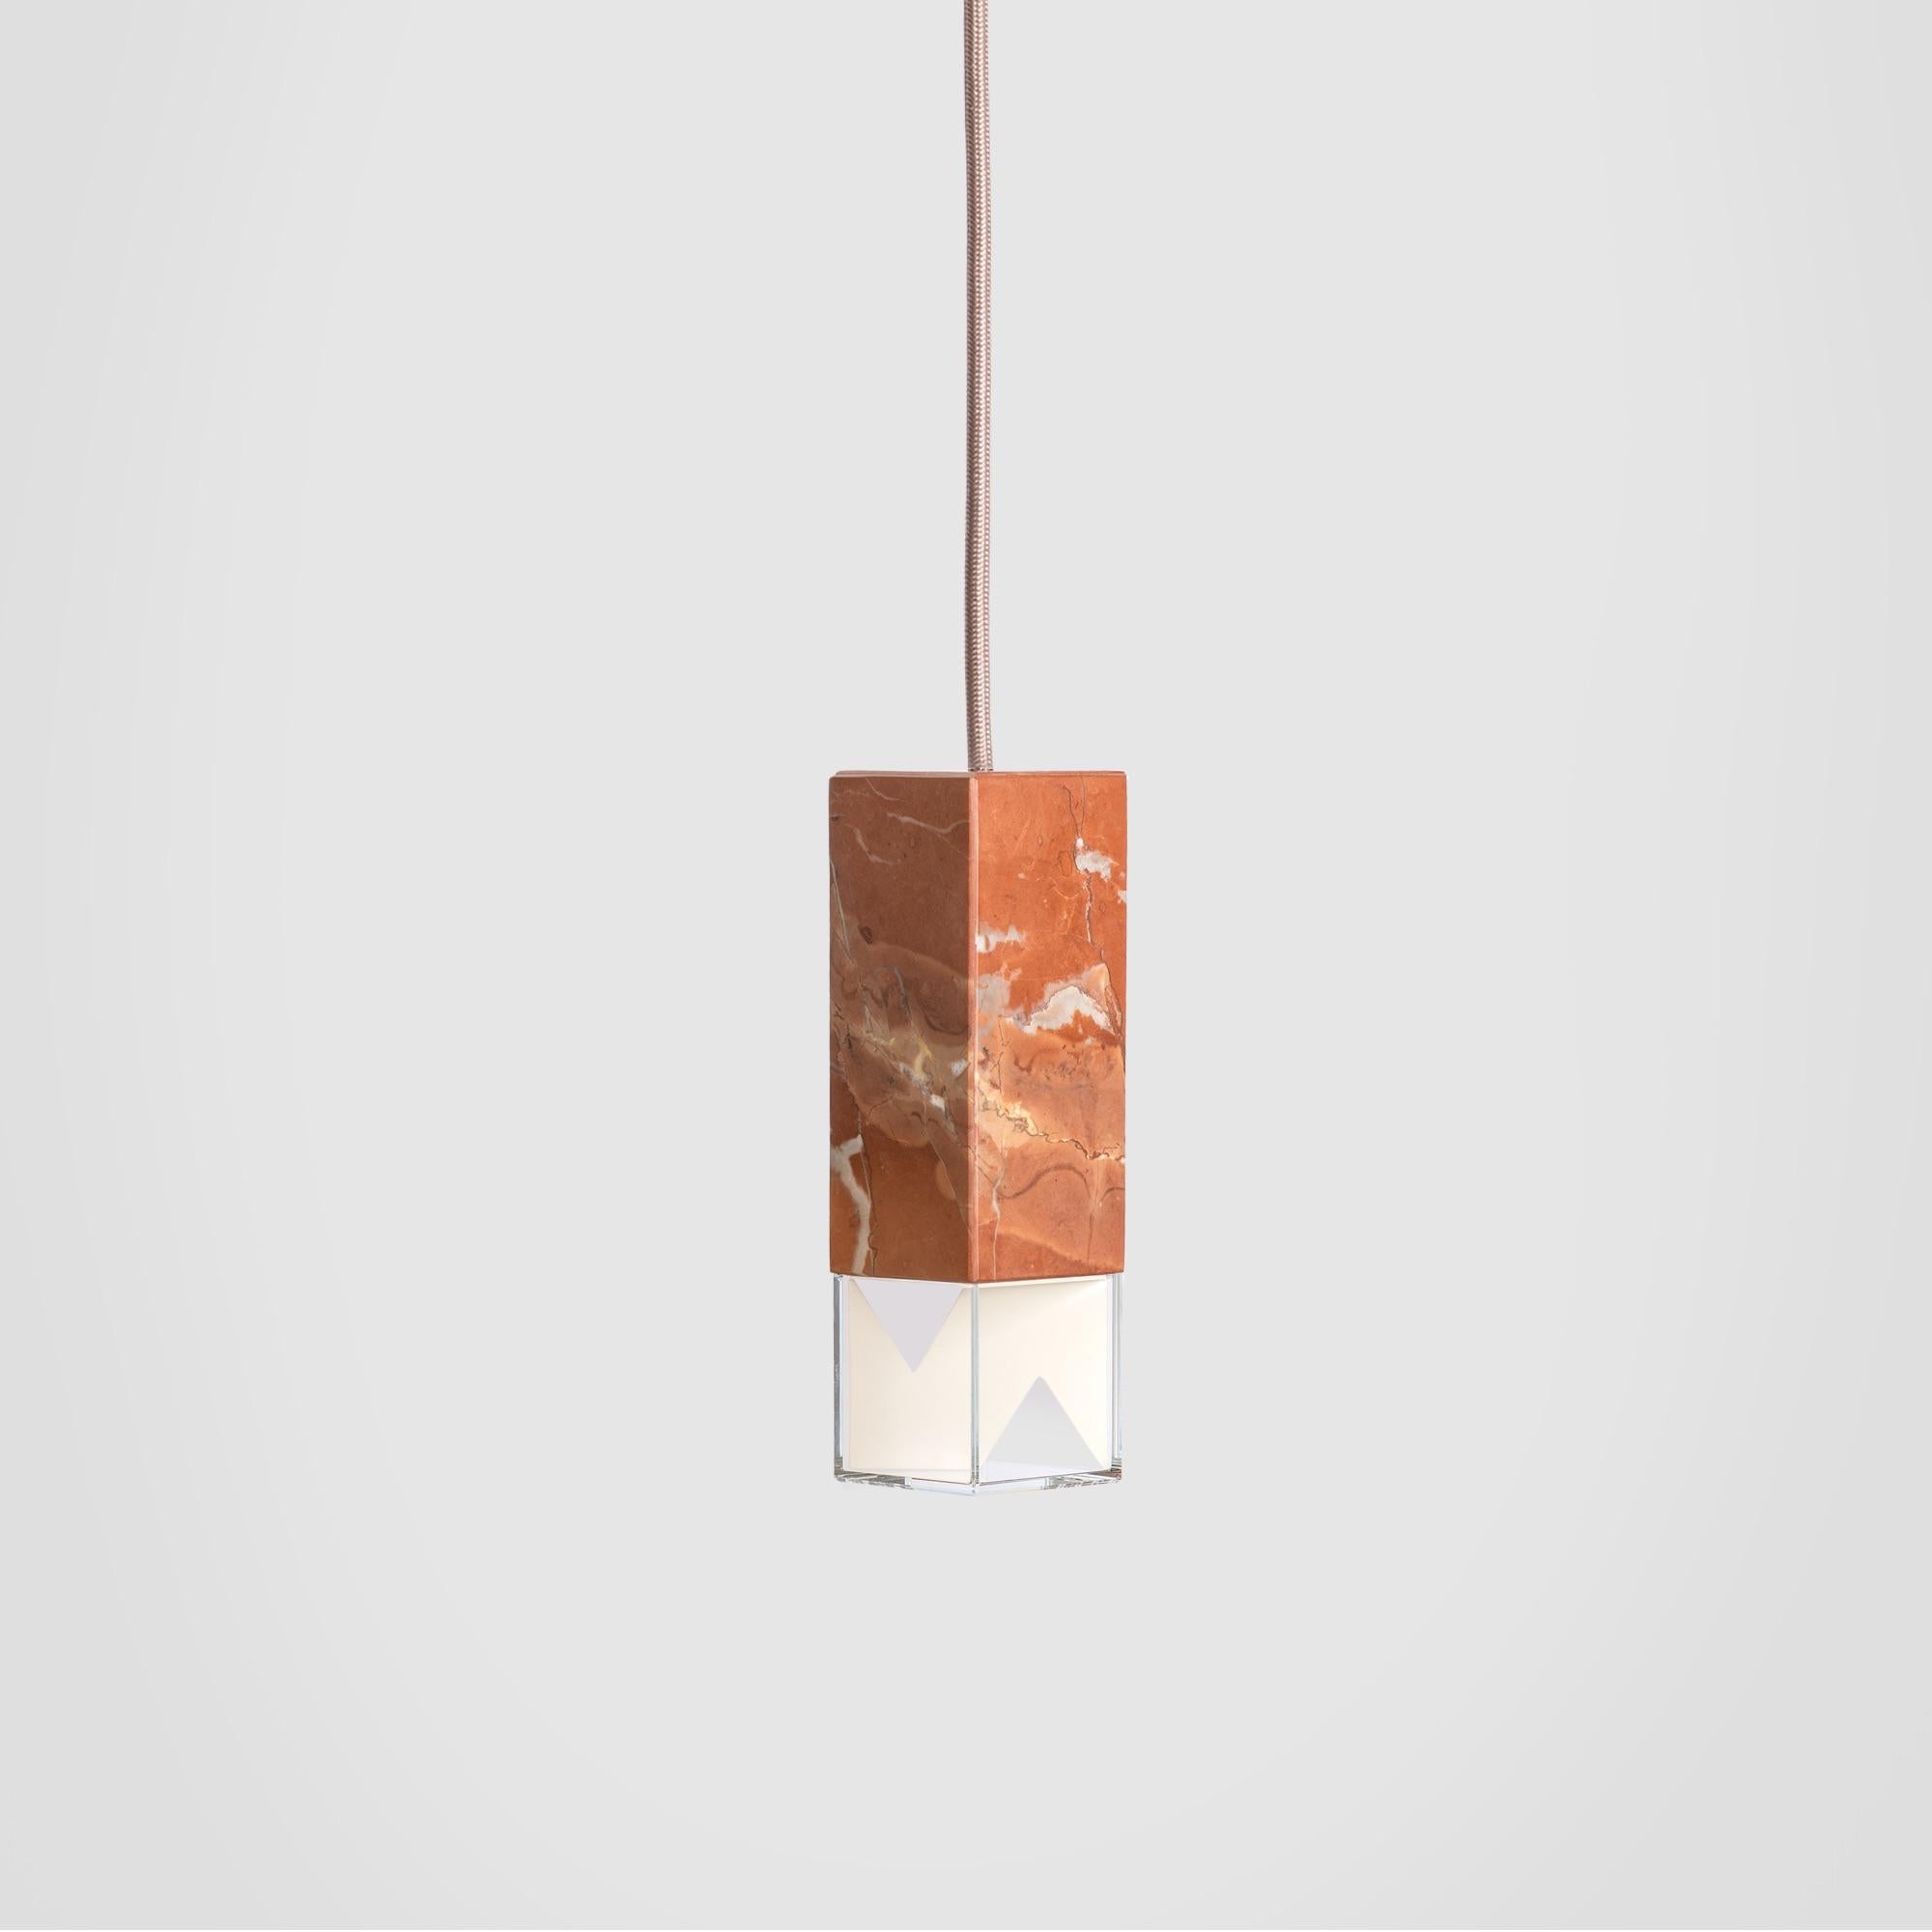 About
Red Marble Trio Chandelier Ceiling Light by Formaminima

Lamp/One Red Trio from Colour Edition
Design by Formaminima
Chandelier
Materials:
Body lamp handcrafted in solid marble Red Collemandina / crystal glass diffuser hosting Limoges